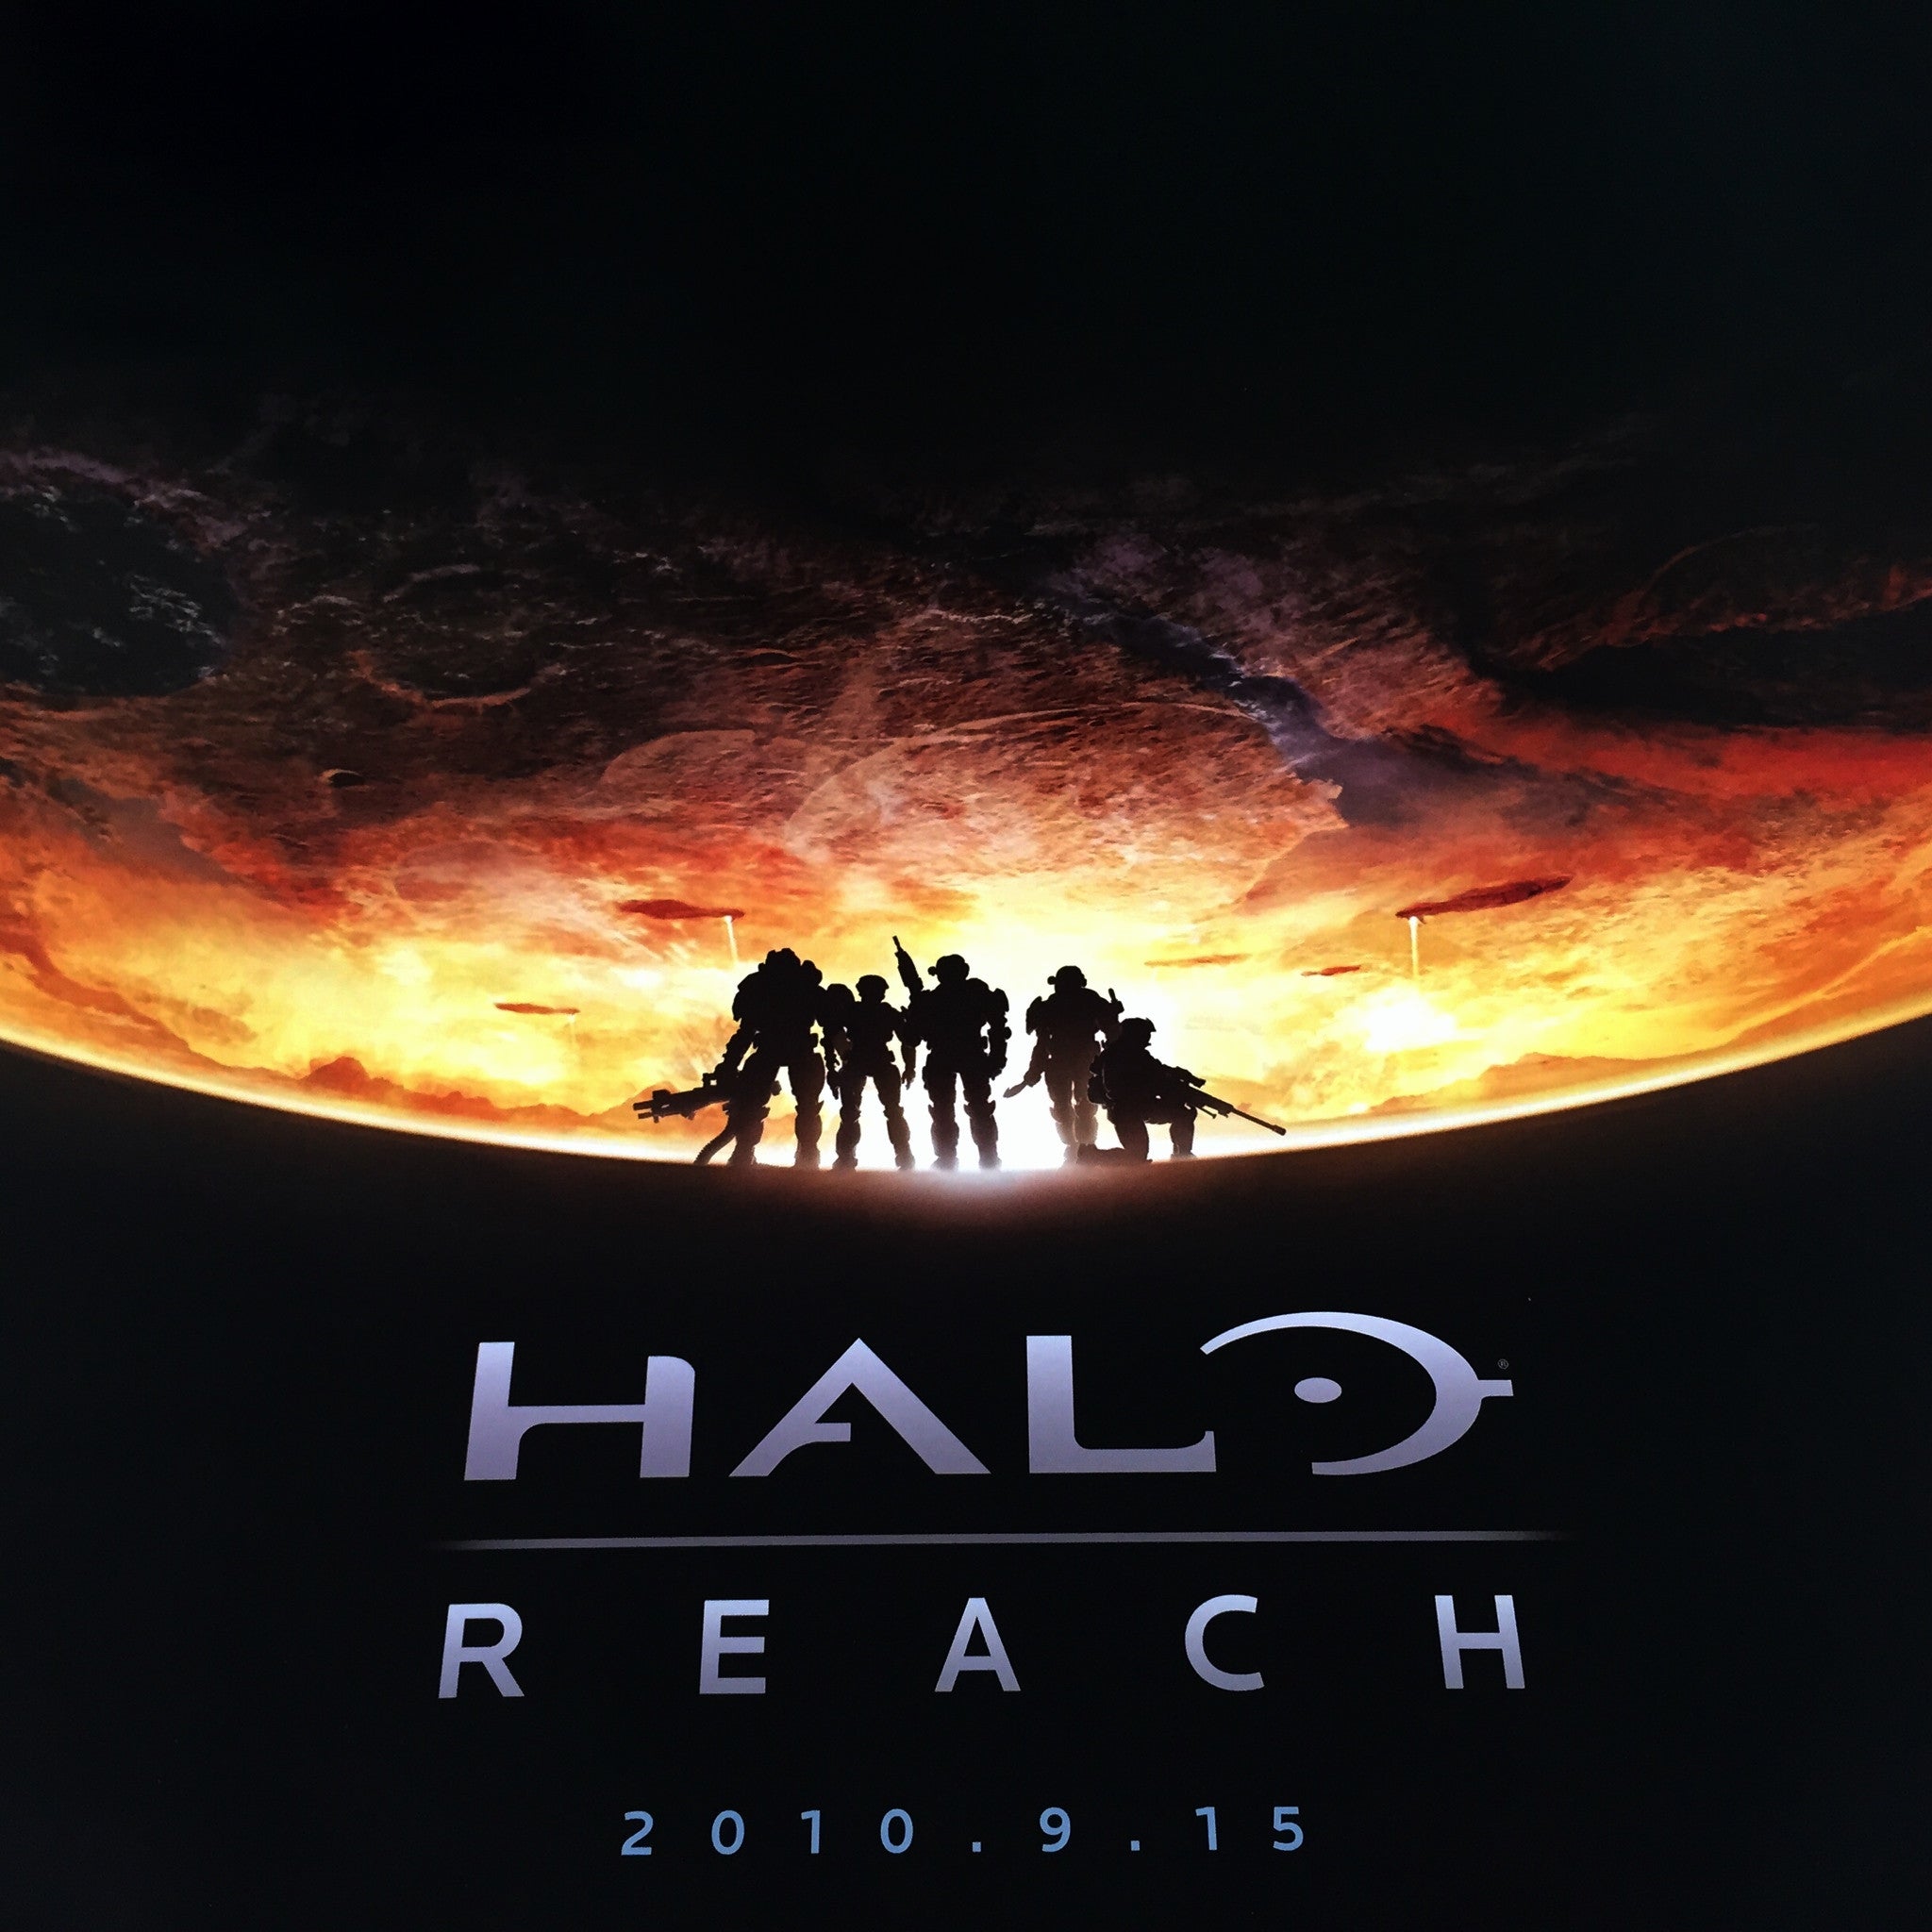 Halo Reach (B2) Japanese Promotional Poster